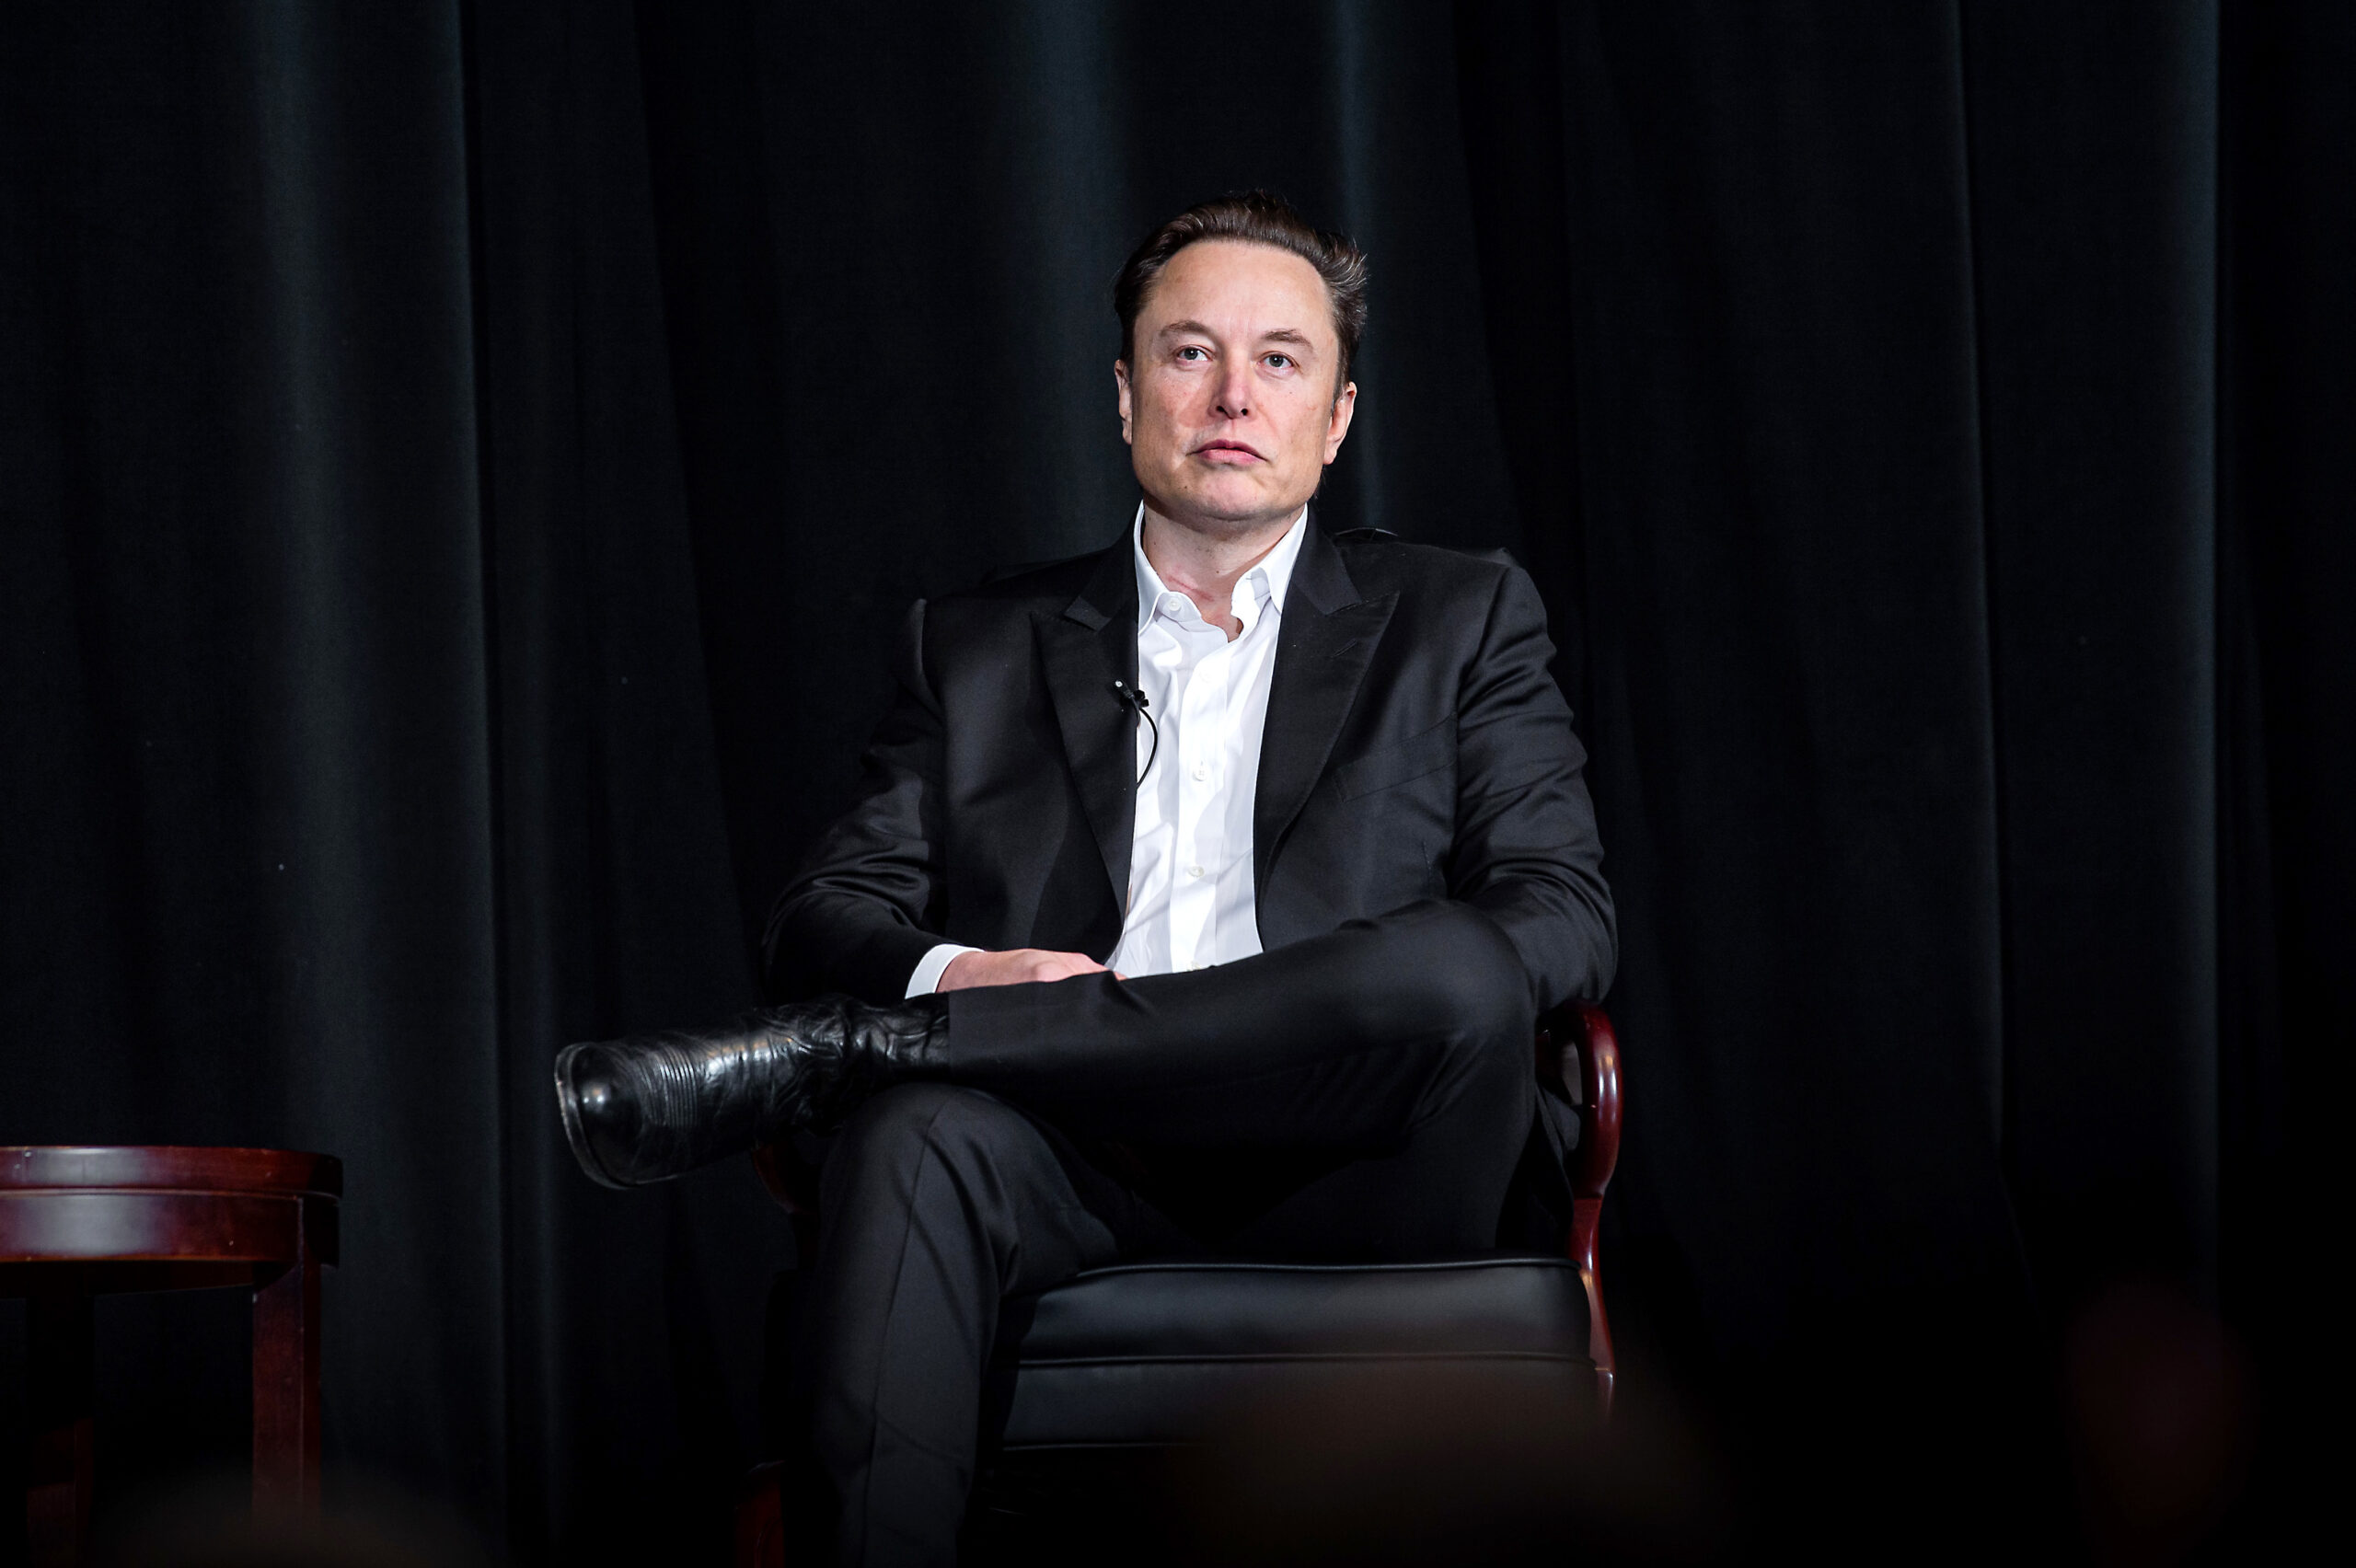 Elon Musk at the United States Air Force Academy